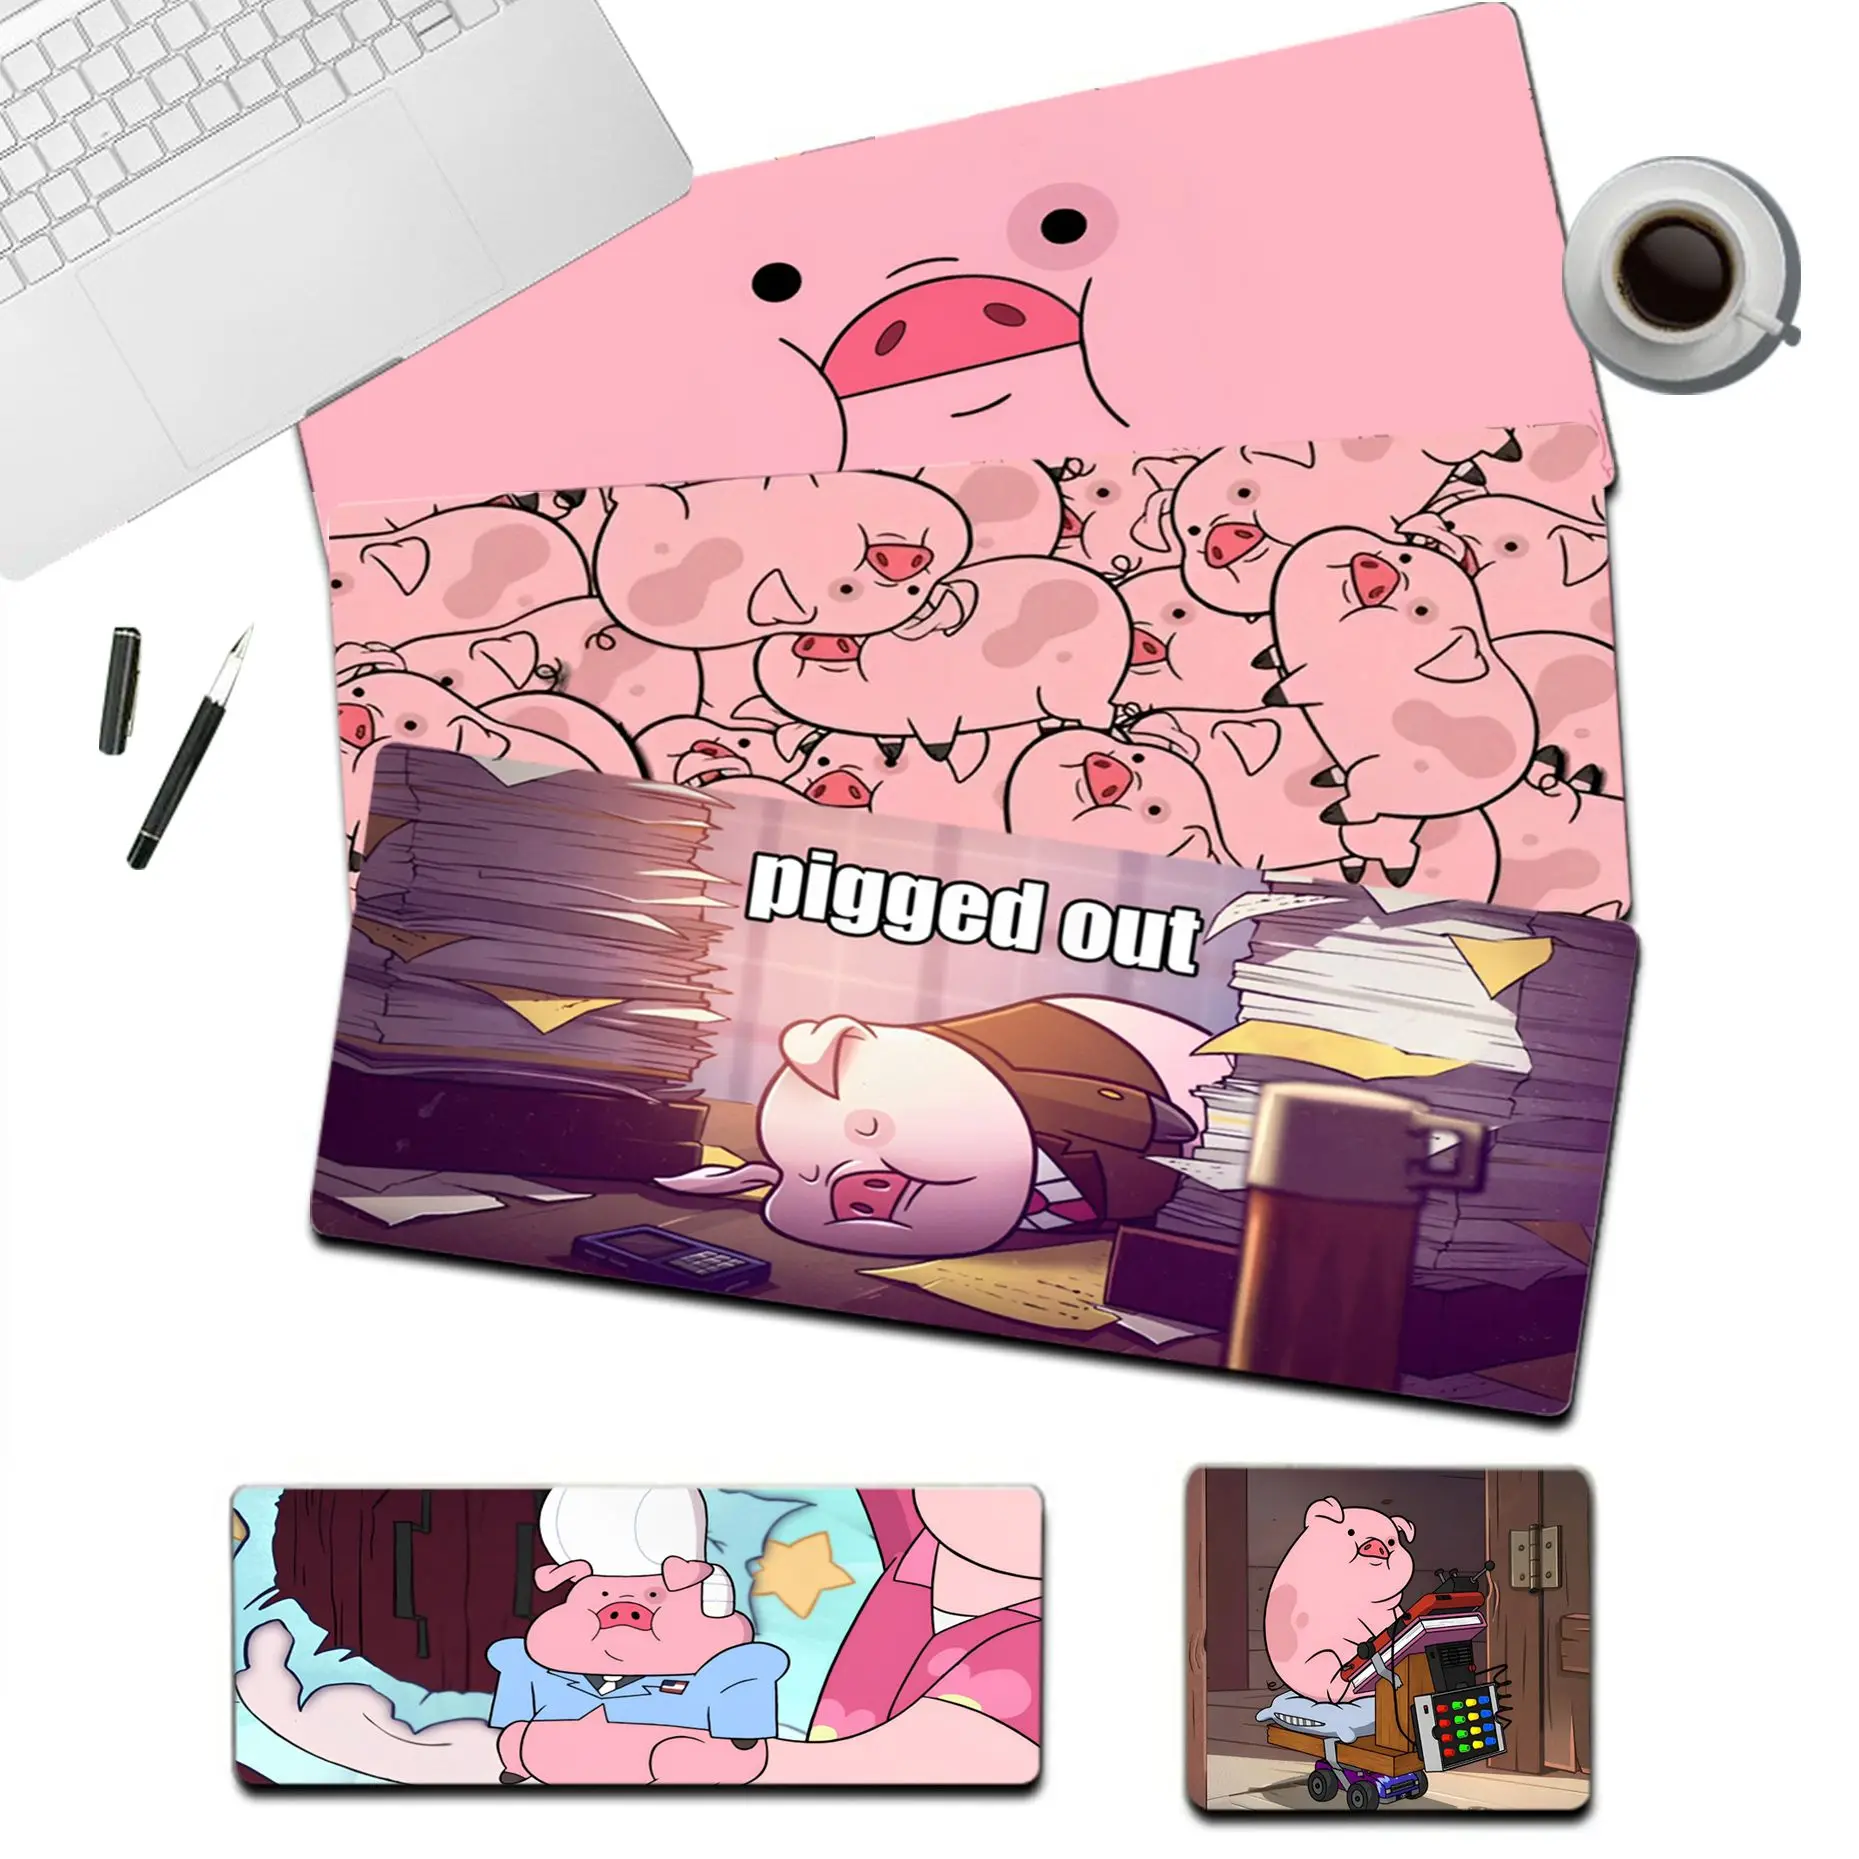 

Gravity Falls Pig Top Quality Gamer Speed Mice Retail Small Rubber Mousepad Size For CSGO Game Player Desktop PC Computer Laptop